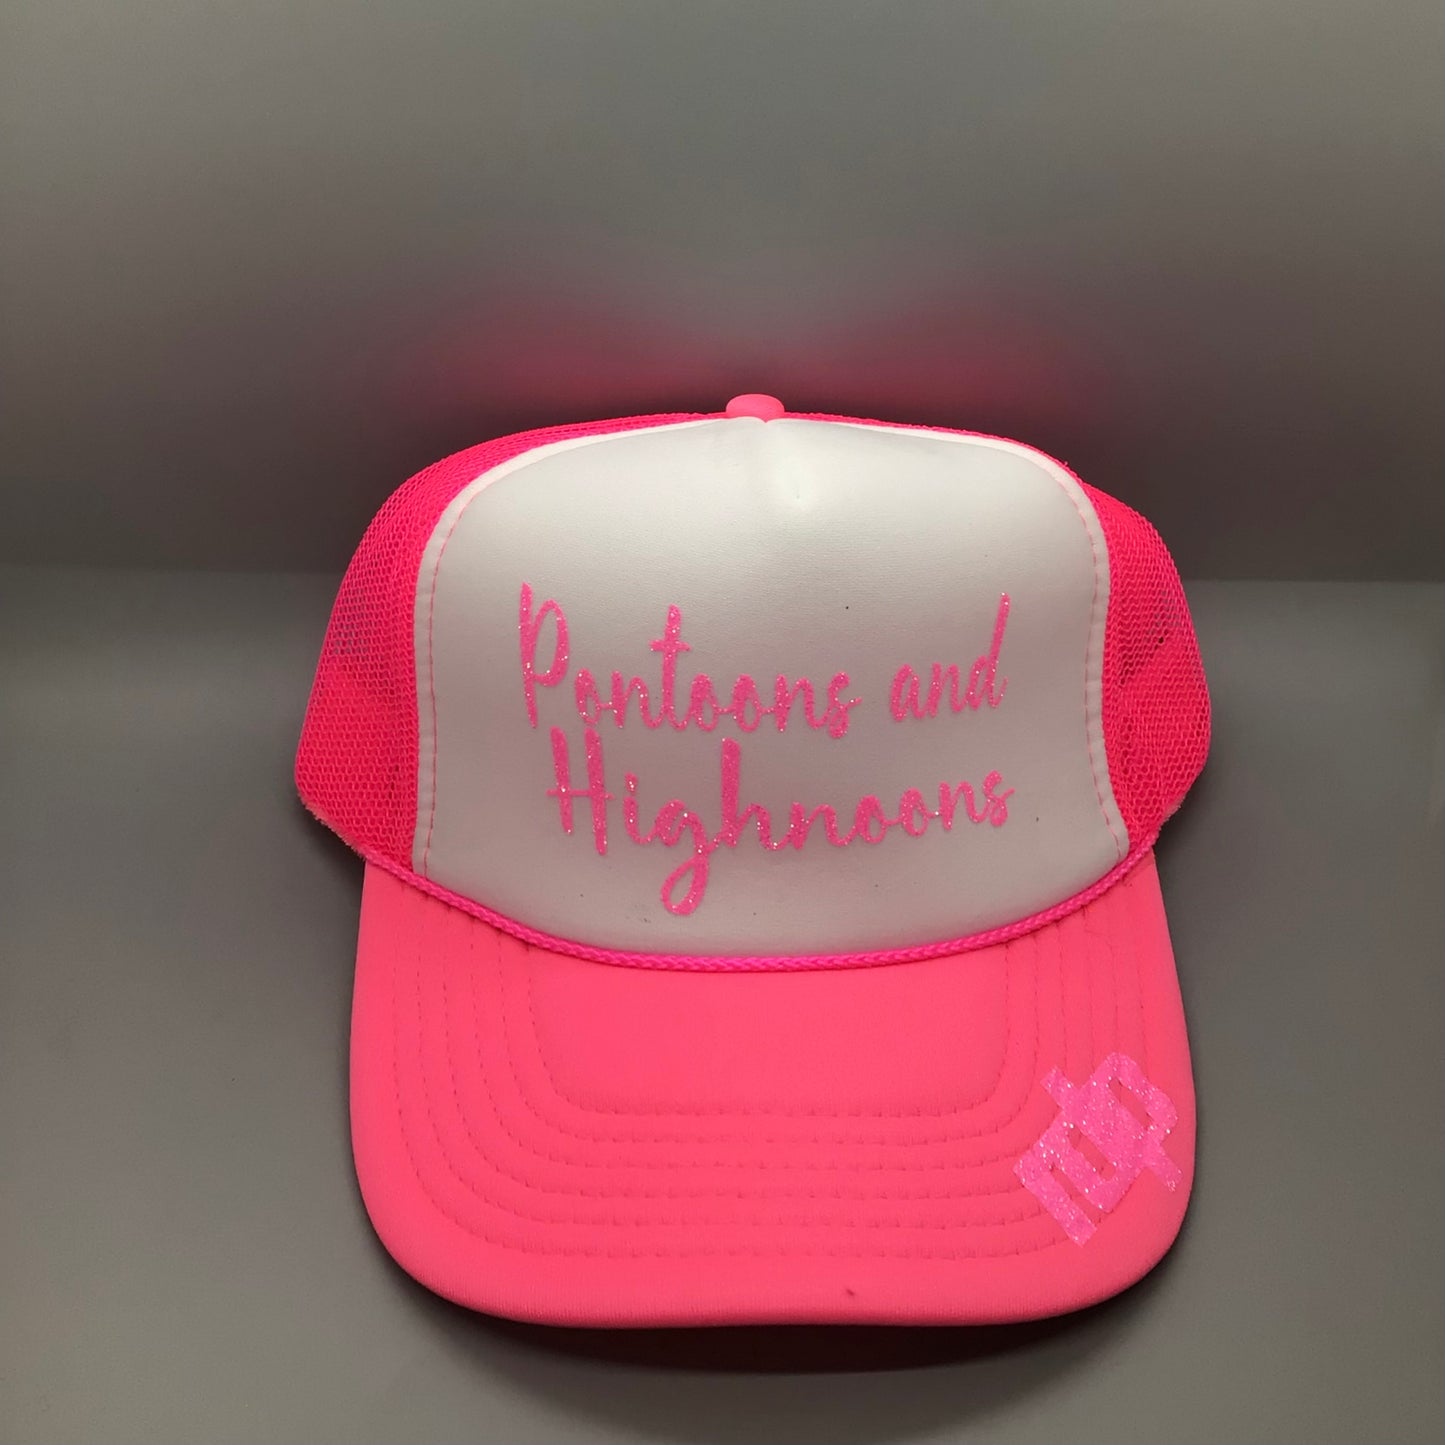 Women's "Pontoons and Highnoons" Snapback